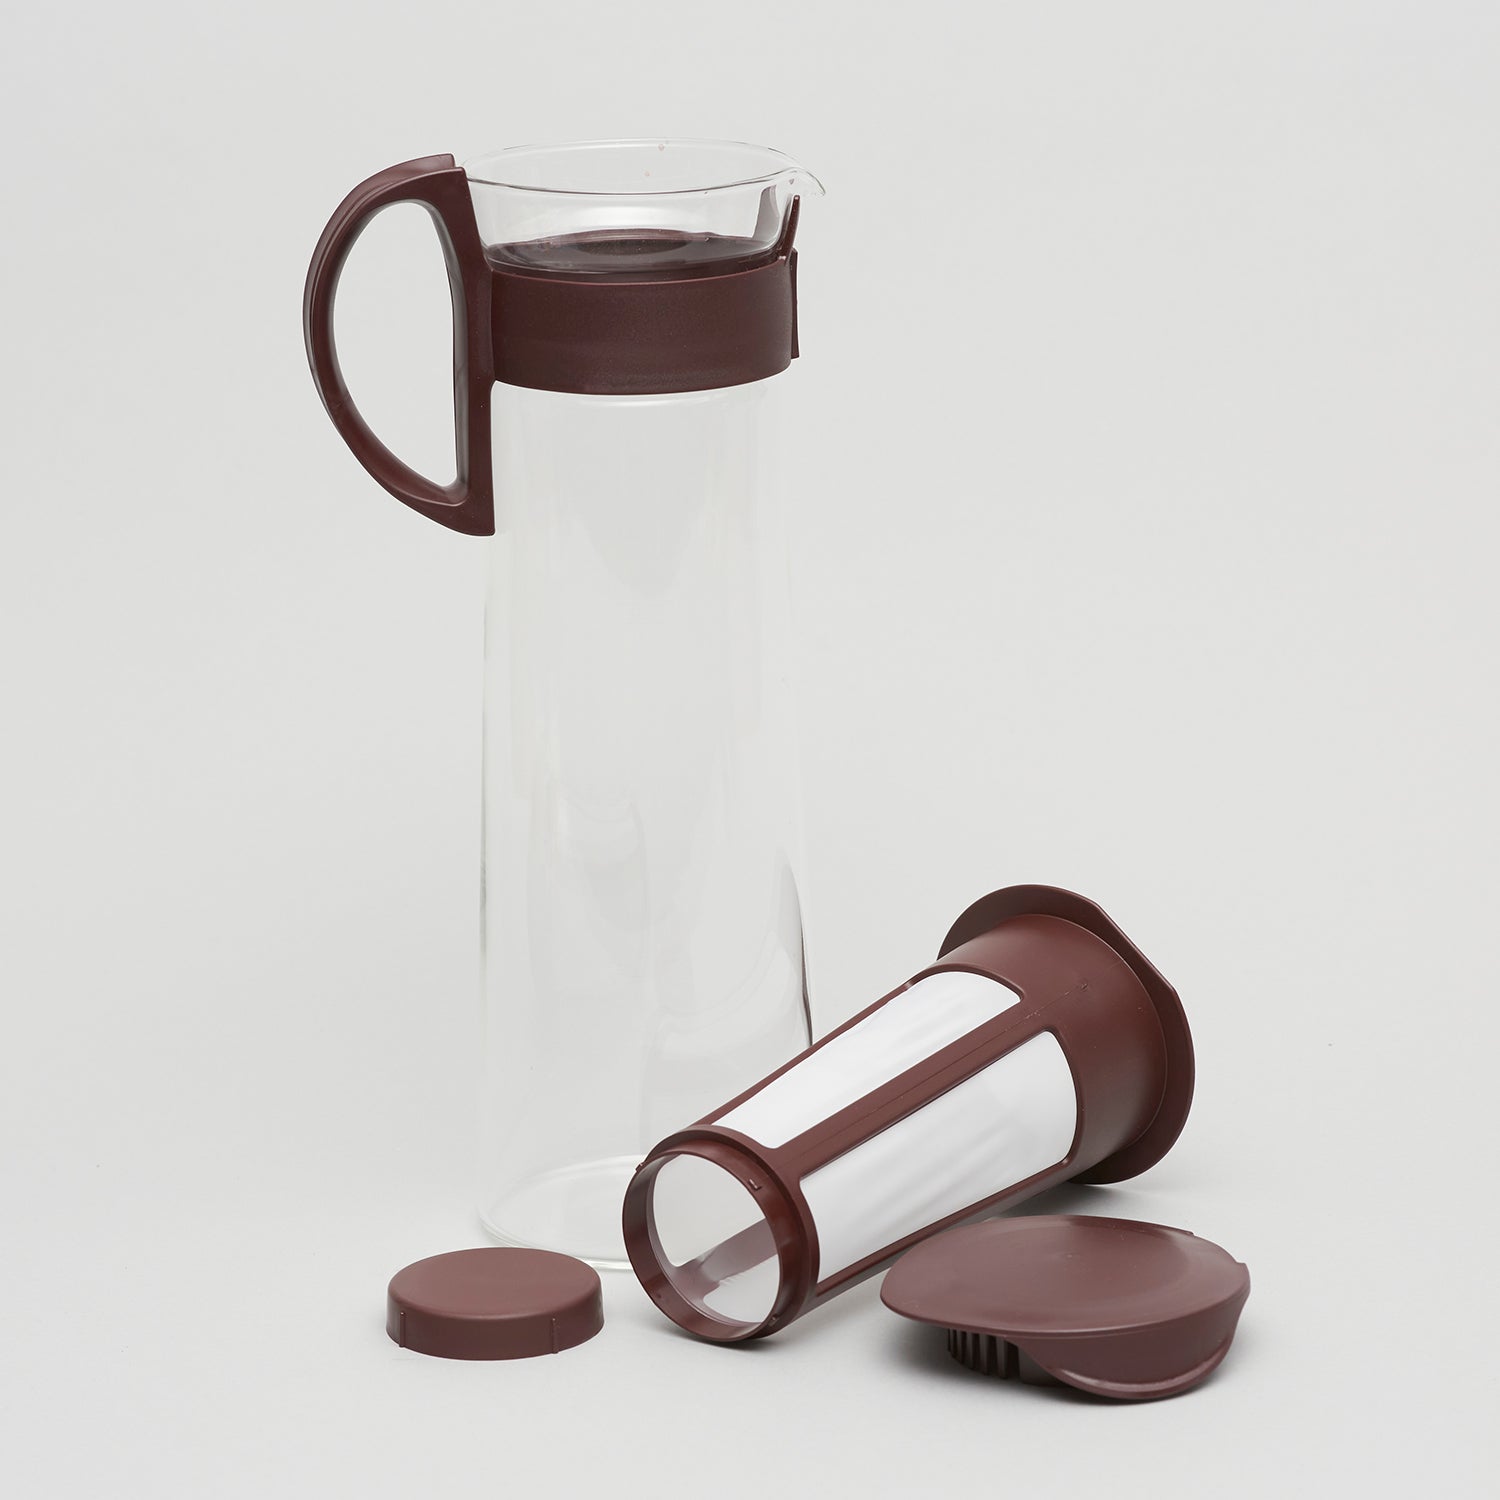 Image shows the 1 litre brown and glass Hario Cold Brew Coffee Maker with the filter taken out.